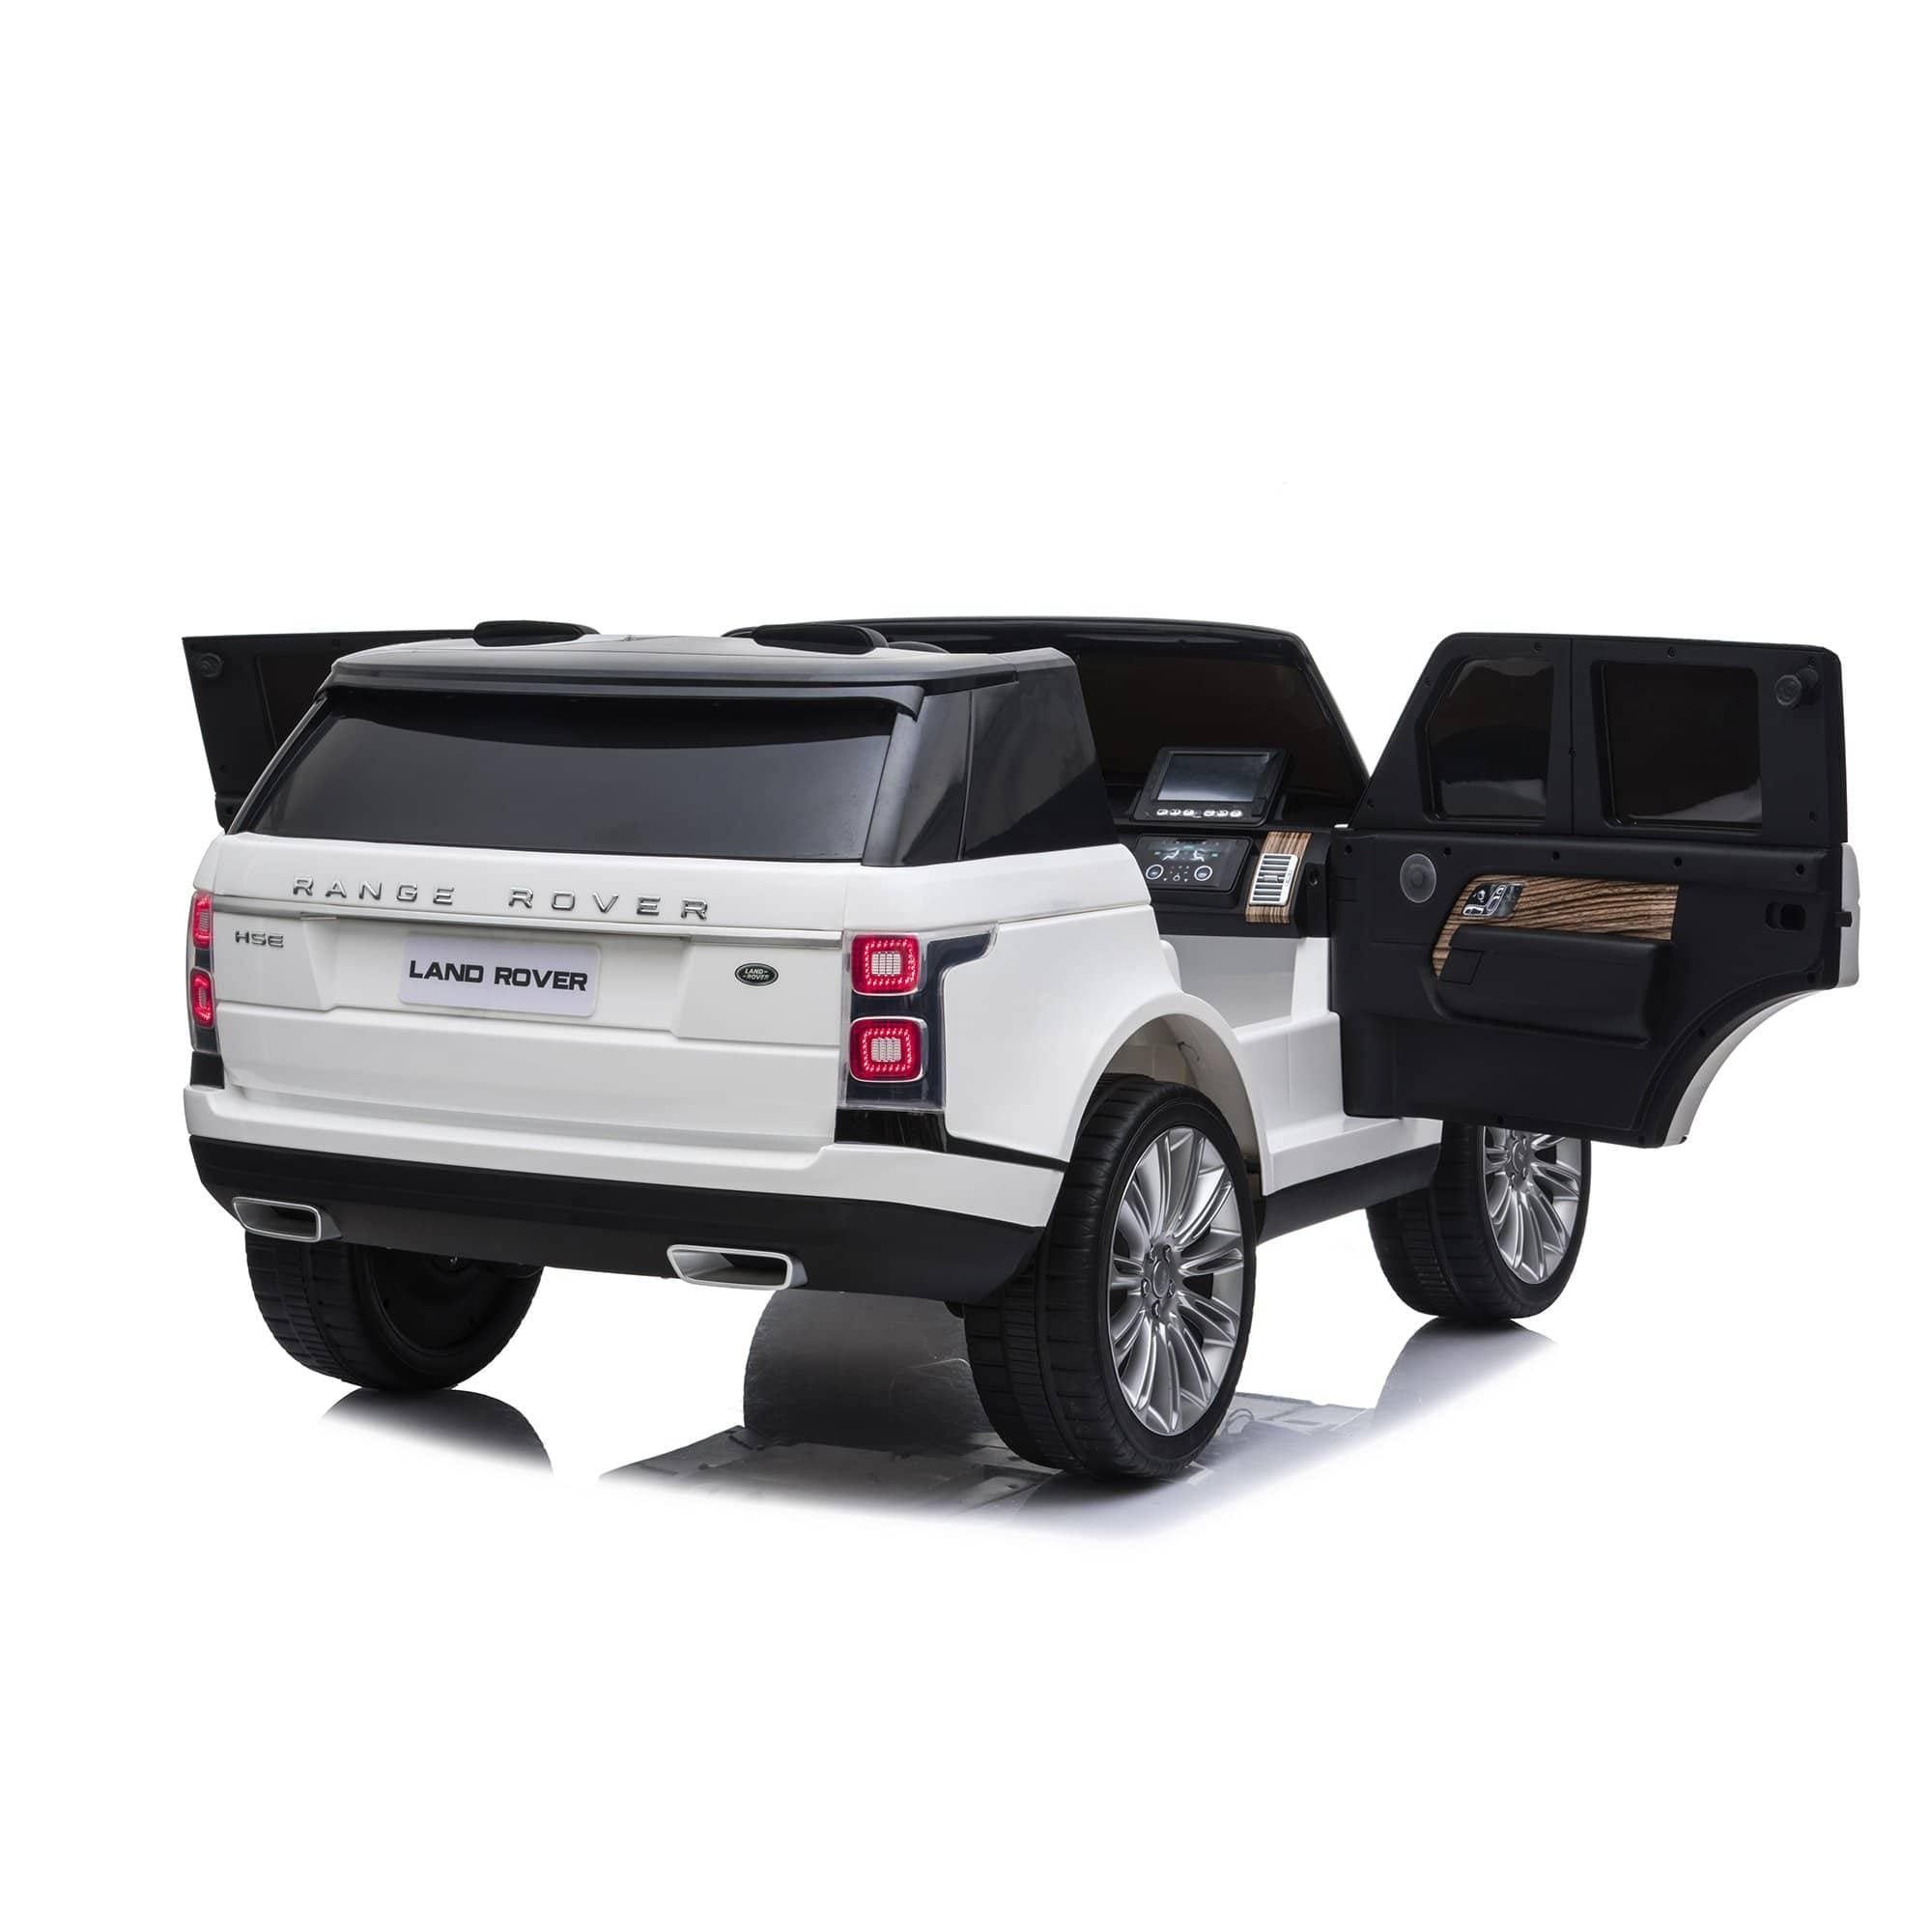 12V Range Rover HSE 2 Seater Ride on Car Kids Cars CA - Ride On Toys Store